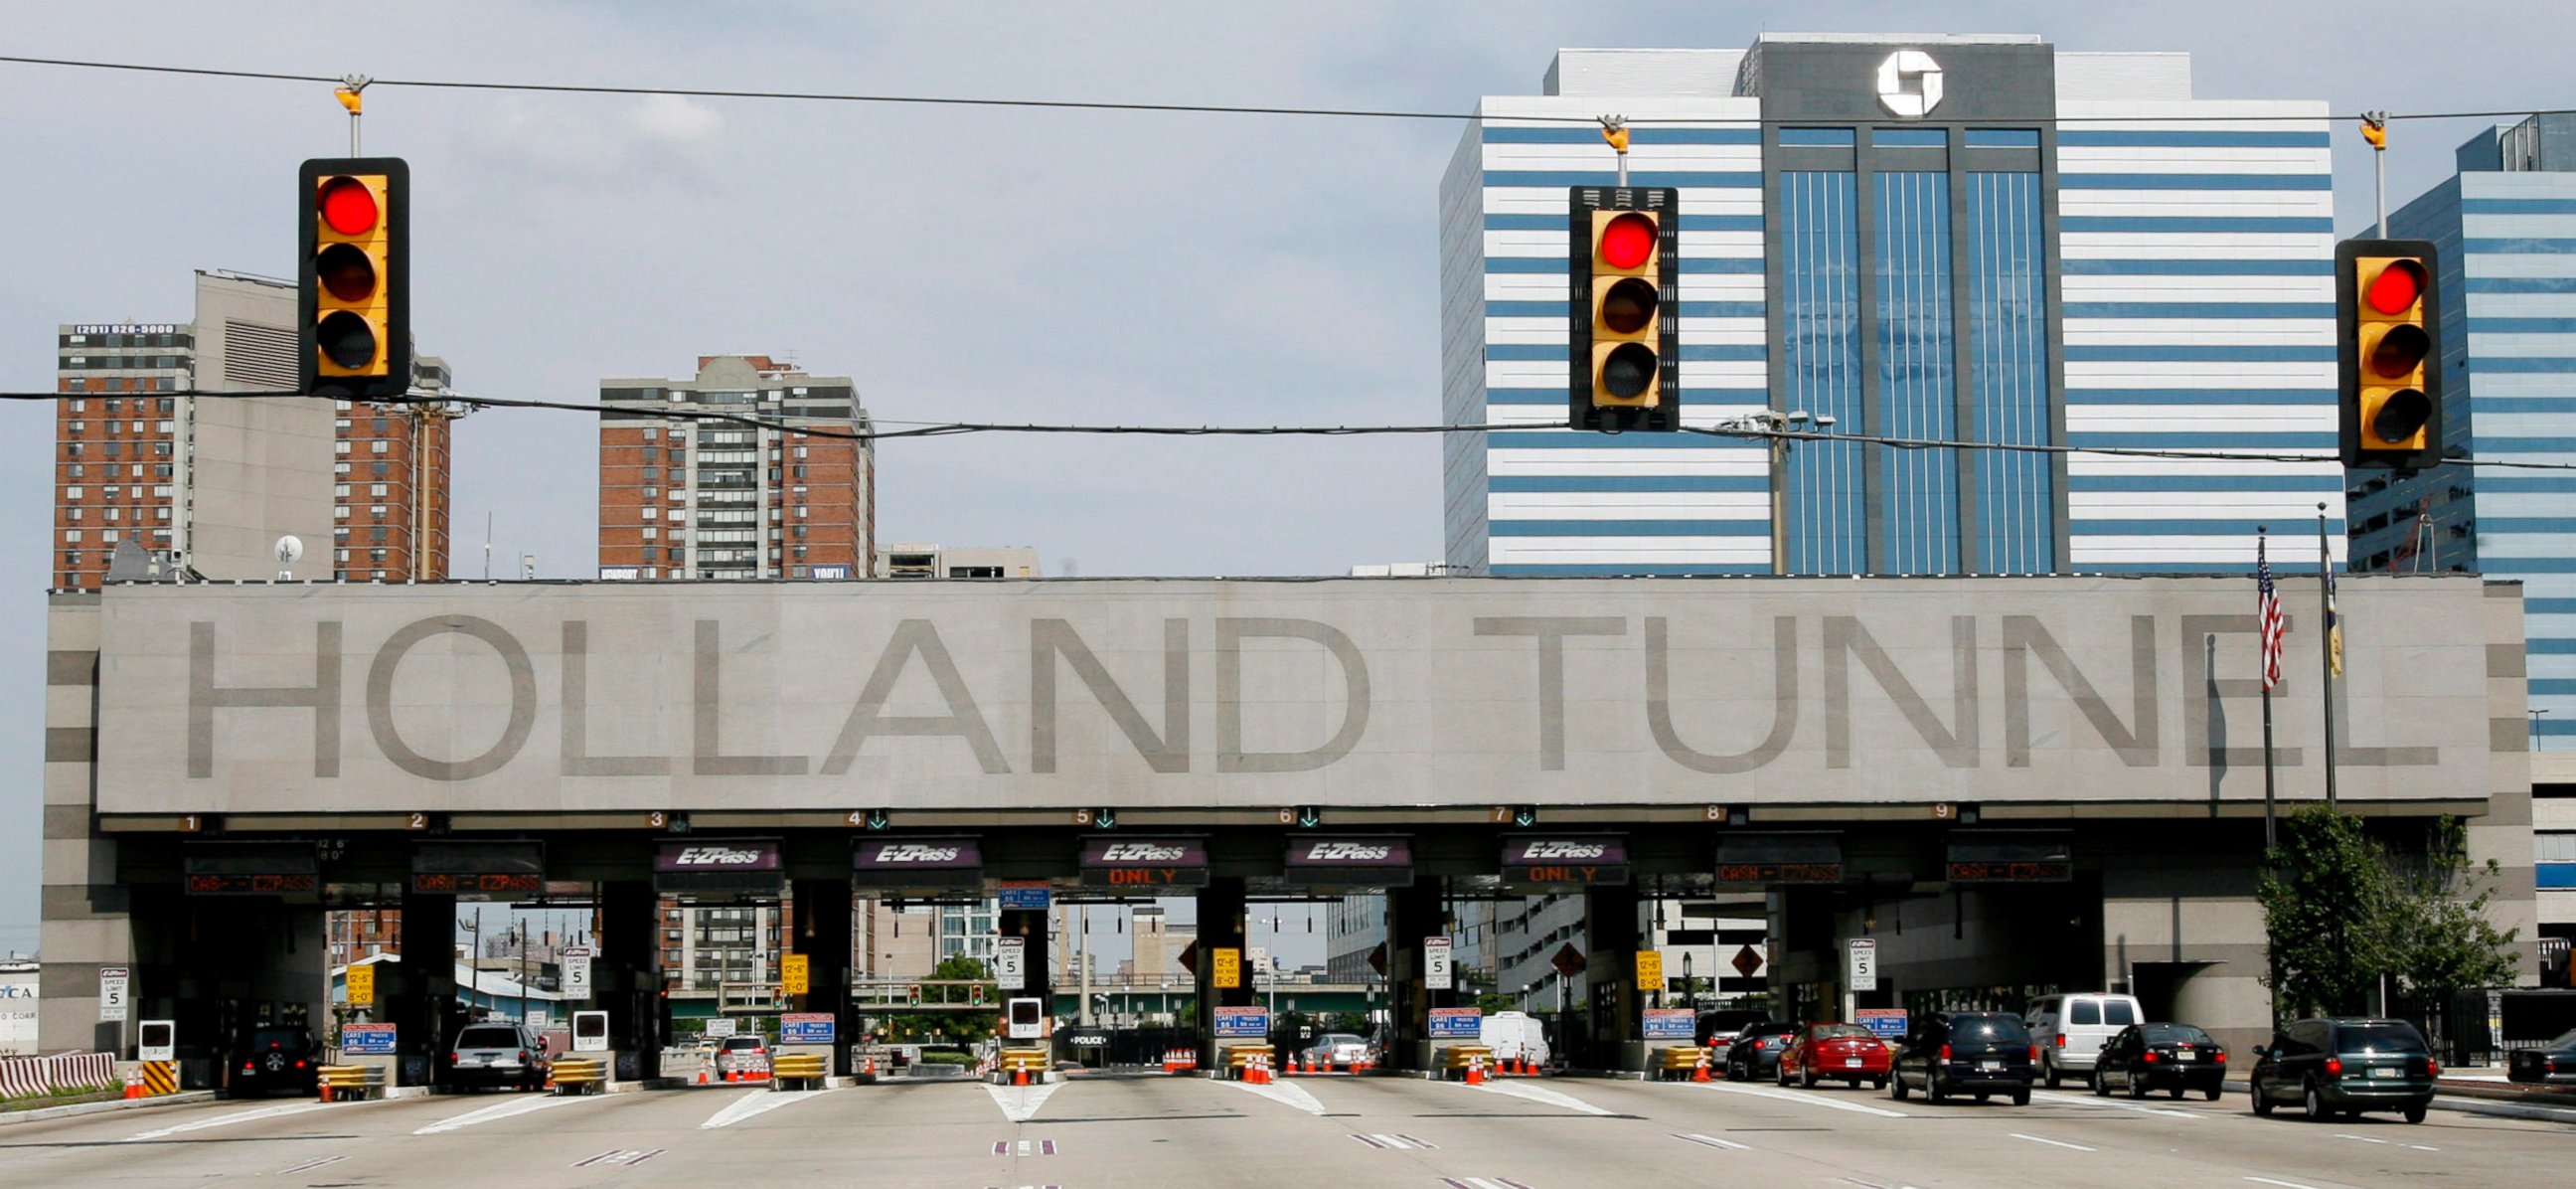 PHOTO: This July 7, 2006 file photo shows The New Jersey entrance into the Holland Tunnel in New York.